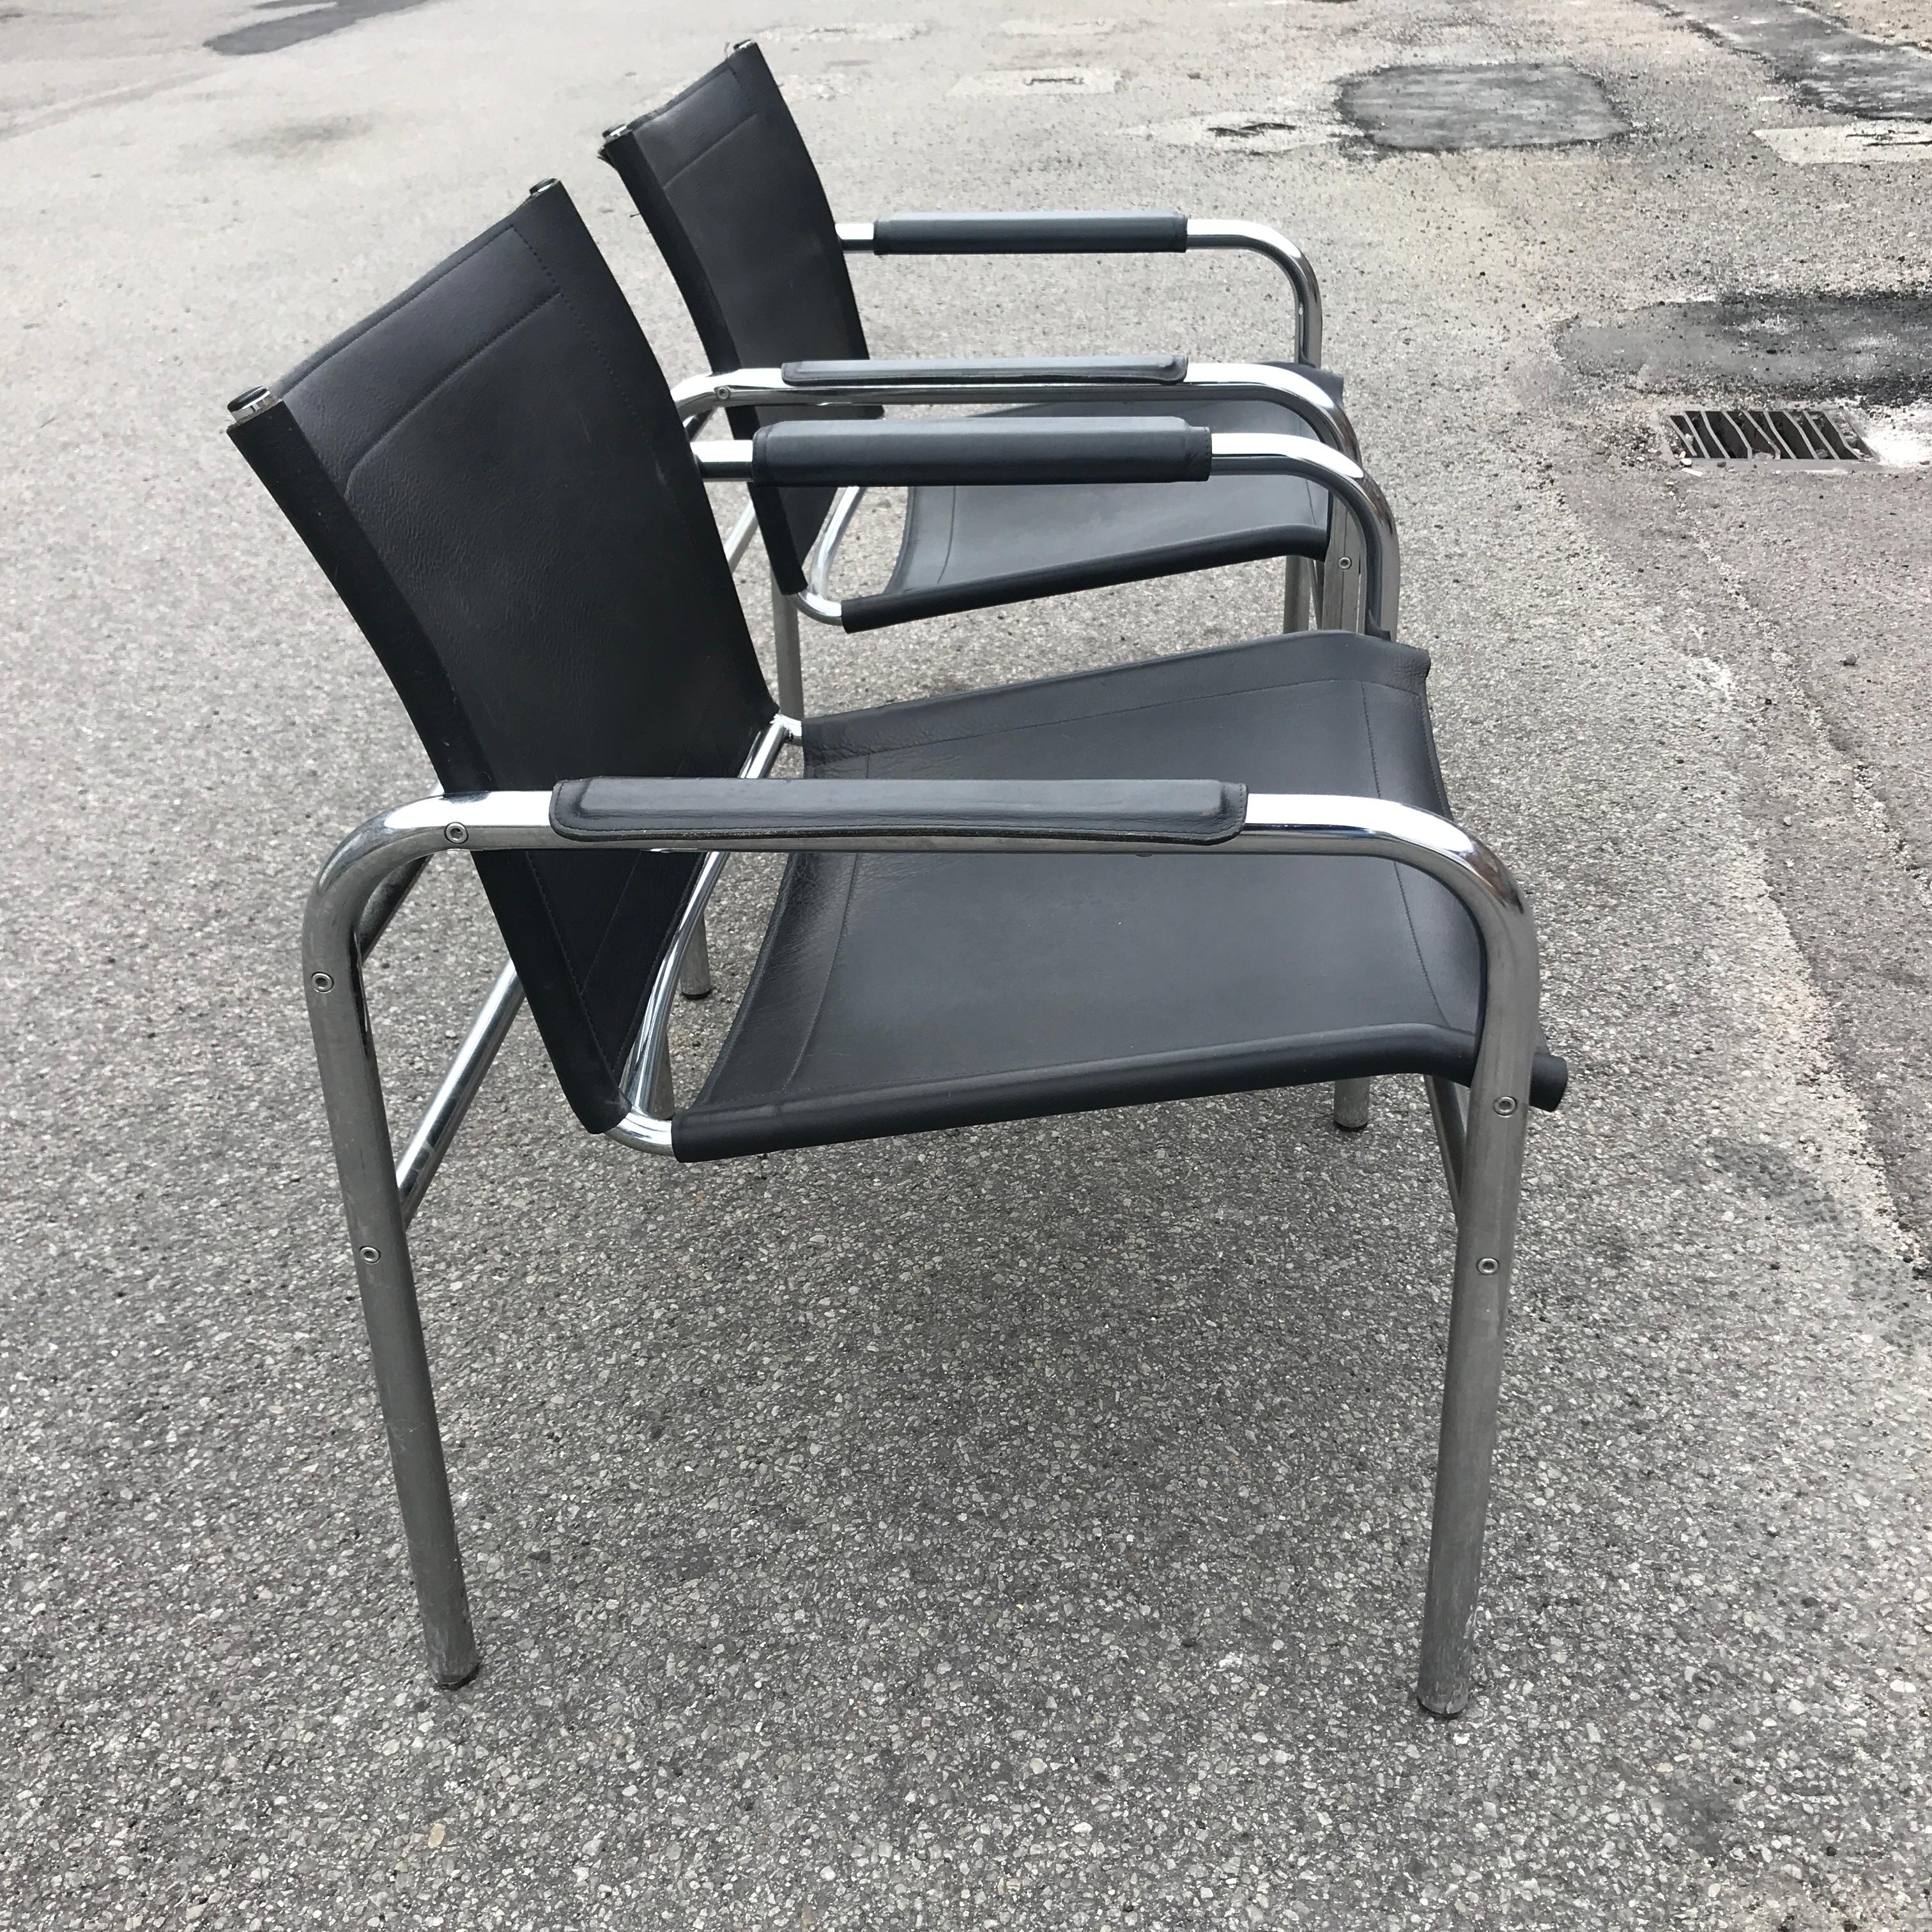 Beautiful pair of armchairs, model Klinte, designed by Tord Bjorklund, Sweden. The chair has a thick leather upholstery and a chrome steel frame. The leather is in excellent vintage condition with
just the right amount of patina.